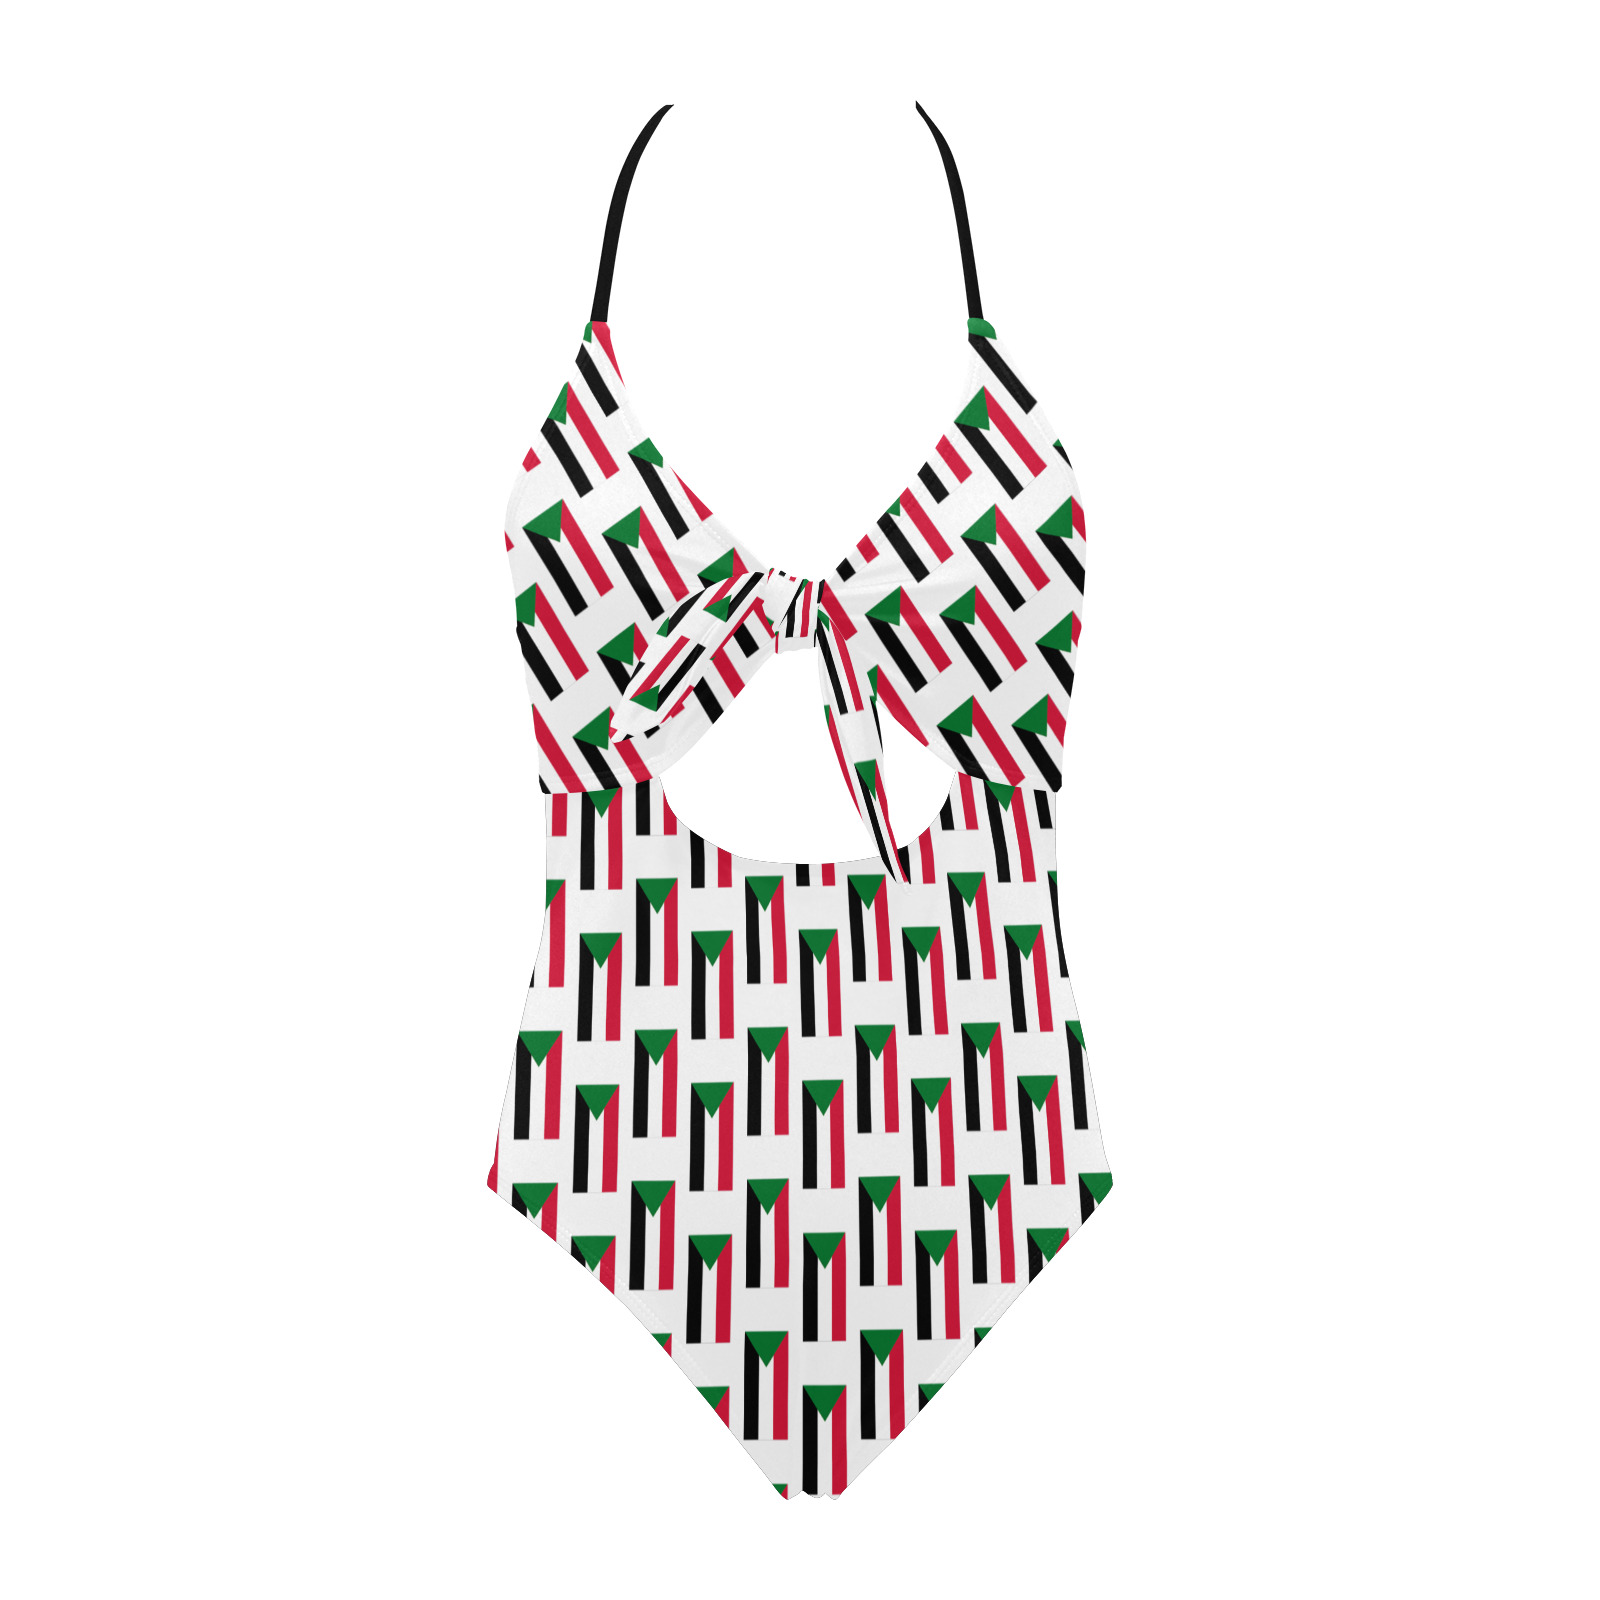 Sudan Flags Backless Hollow Out Bow Tie Swimsuit (Model S17)